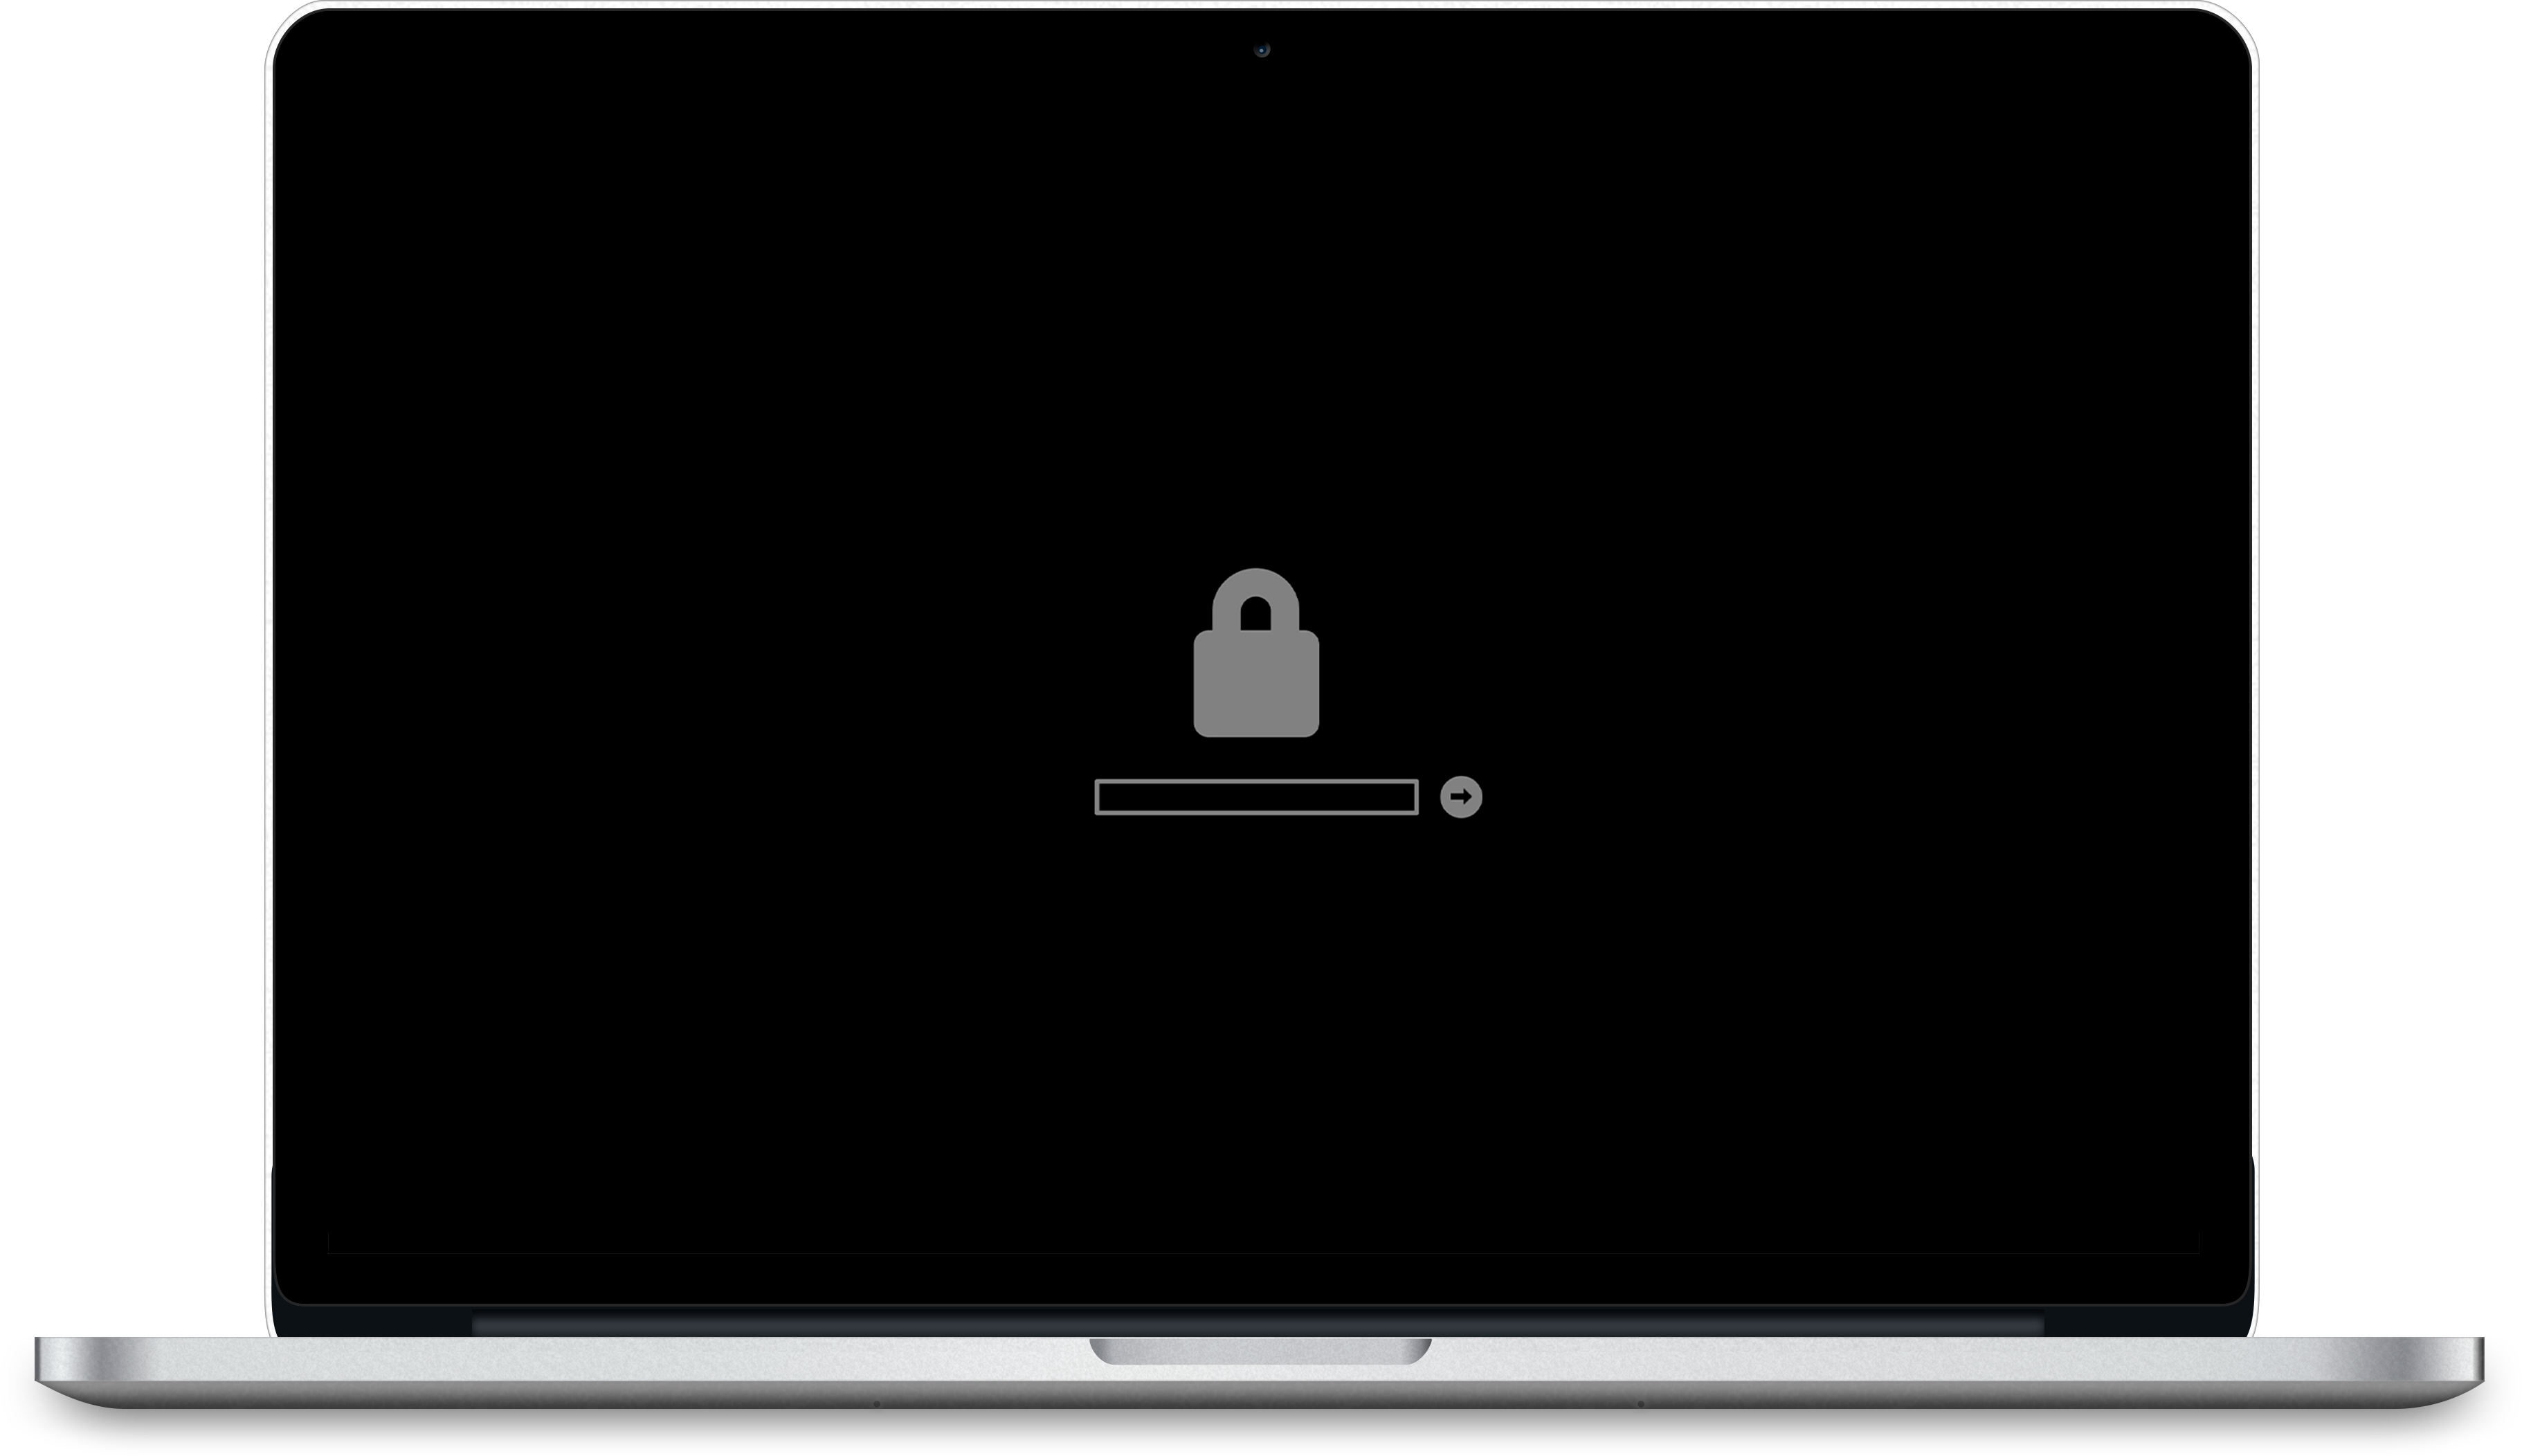 Unlock Macbook Pro & Air in Lost mode with system lock PIN without passcode